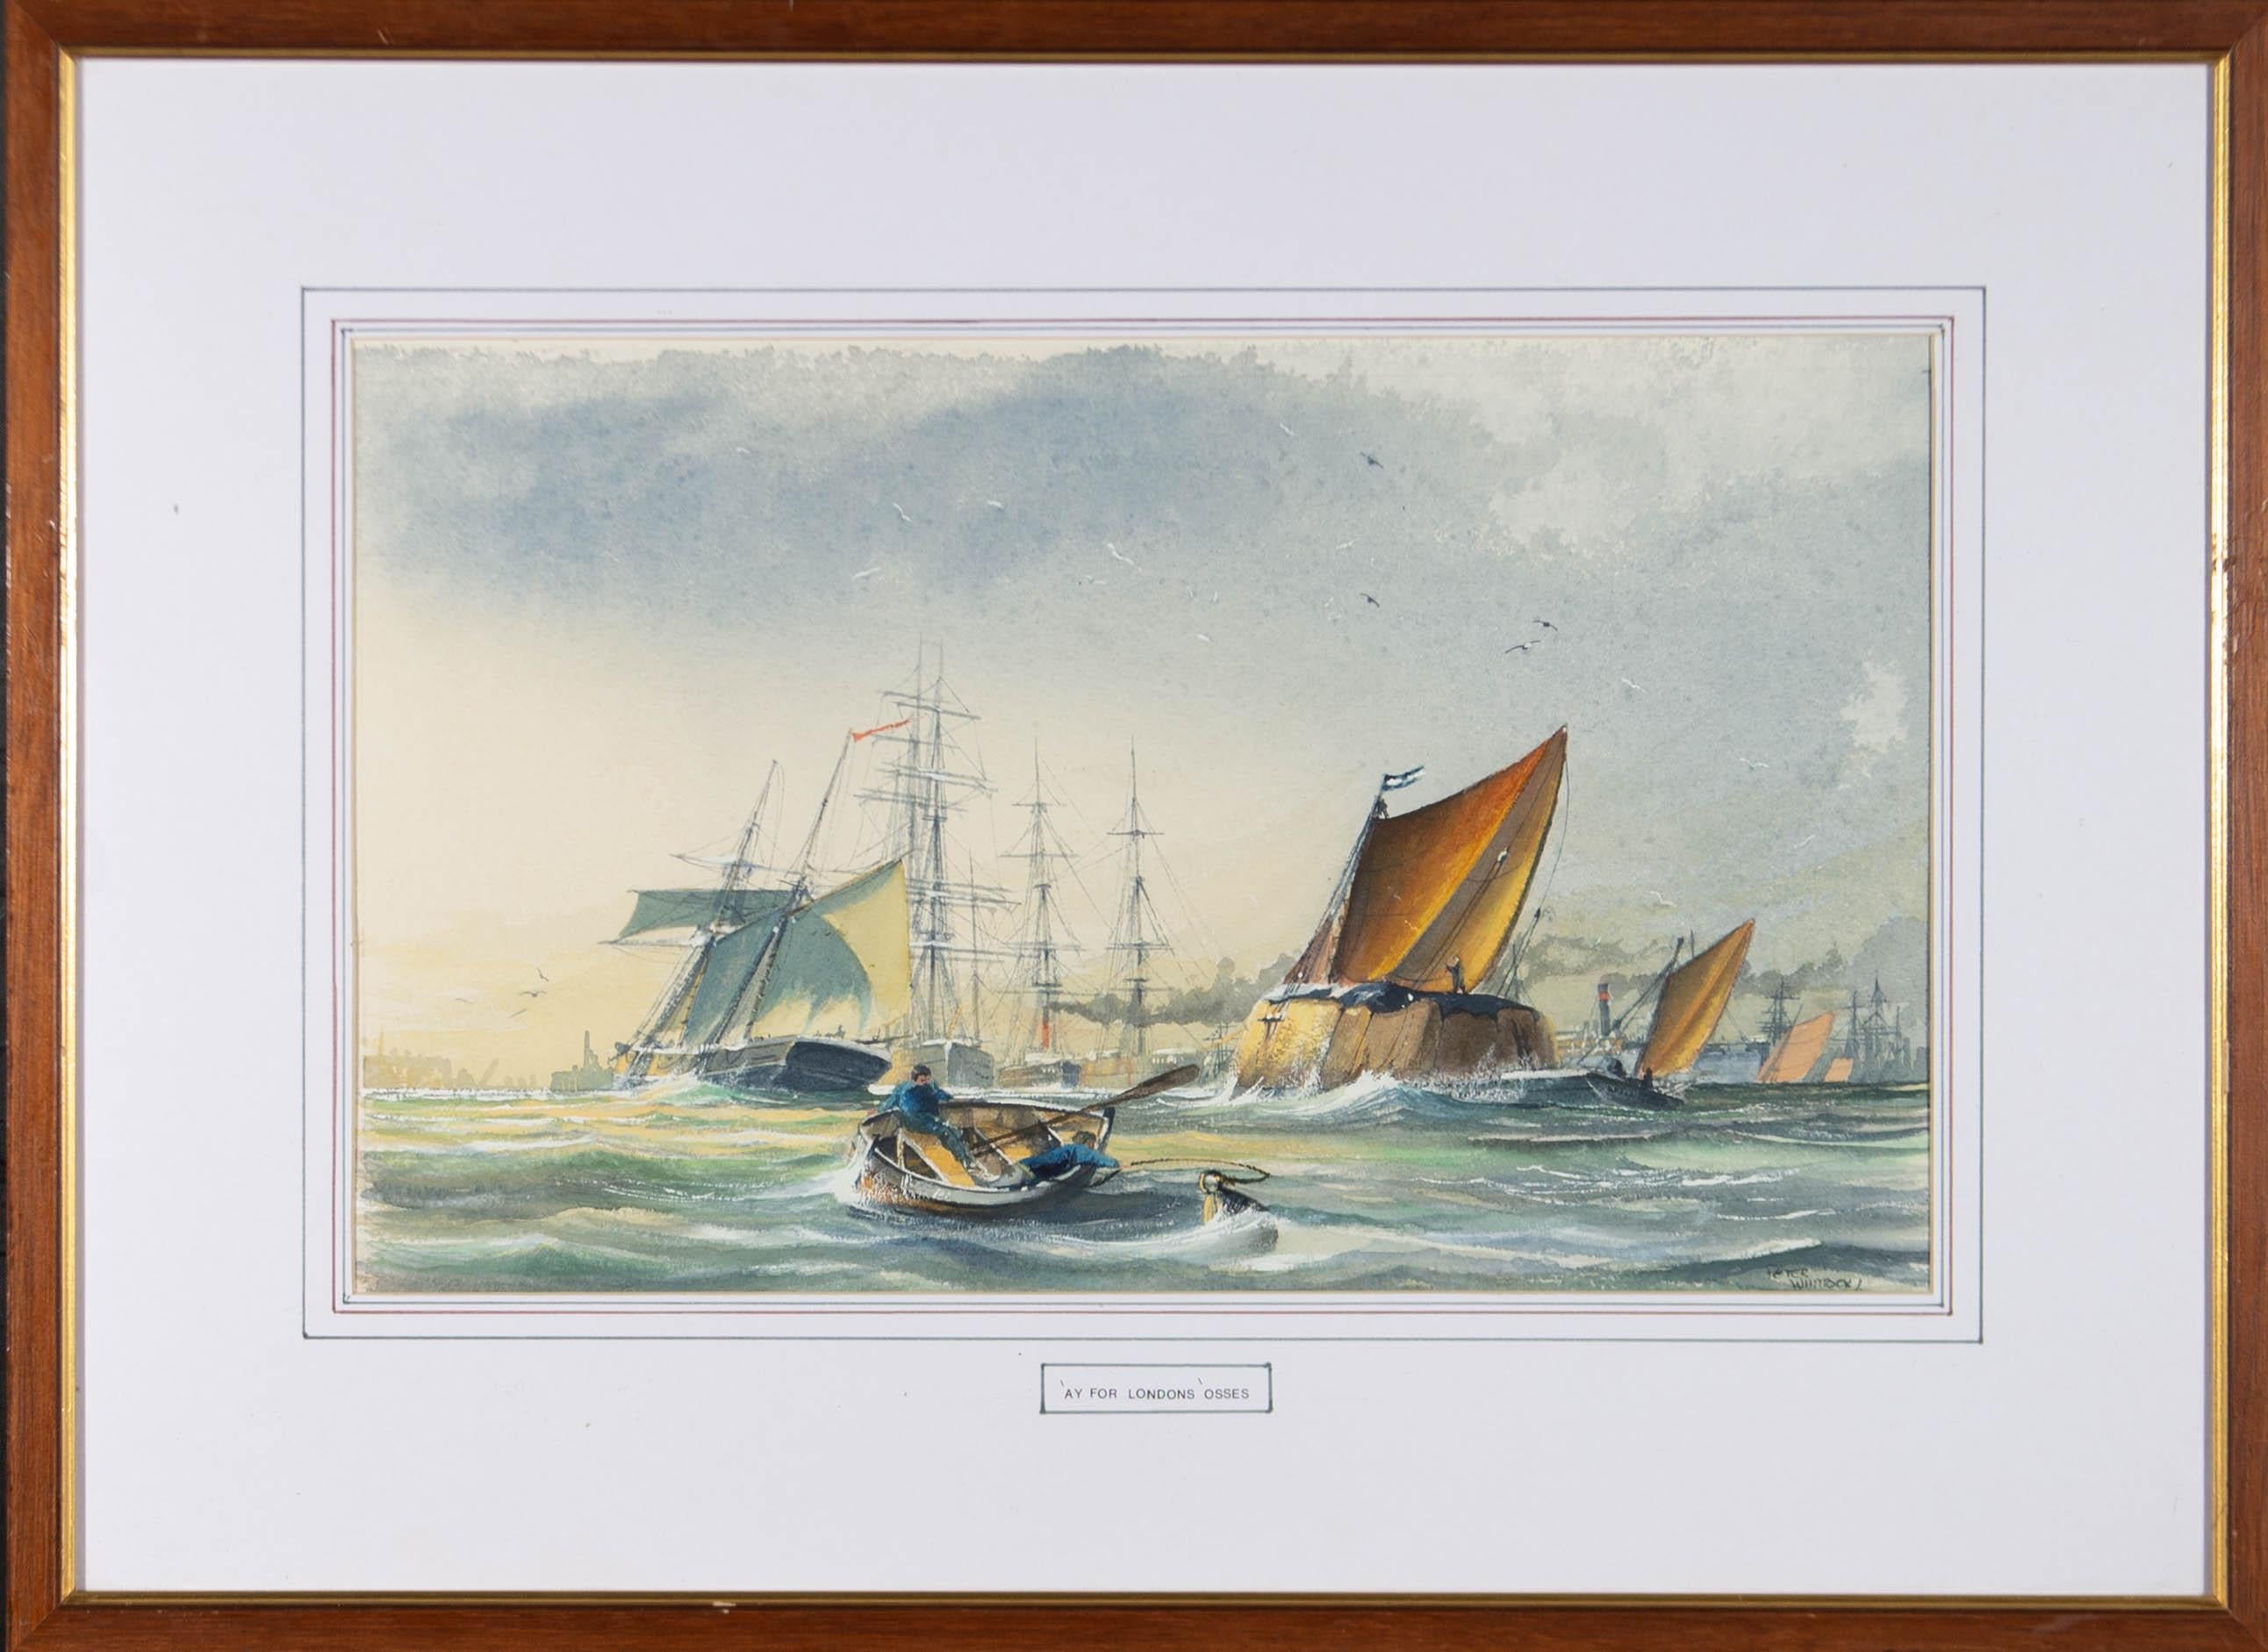 A watercolour and body colour painting of ships and a wave-tossed rowing boat. Presented glazed in a white mount and a wooden frame with a gilt-effect inner edge. The title is inscribed at the centre of the lower edge of the mount. Signed to the